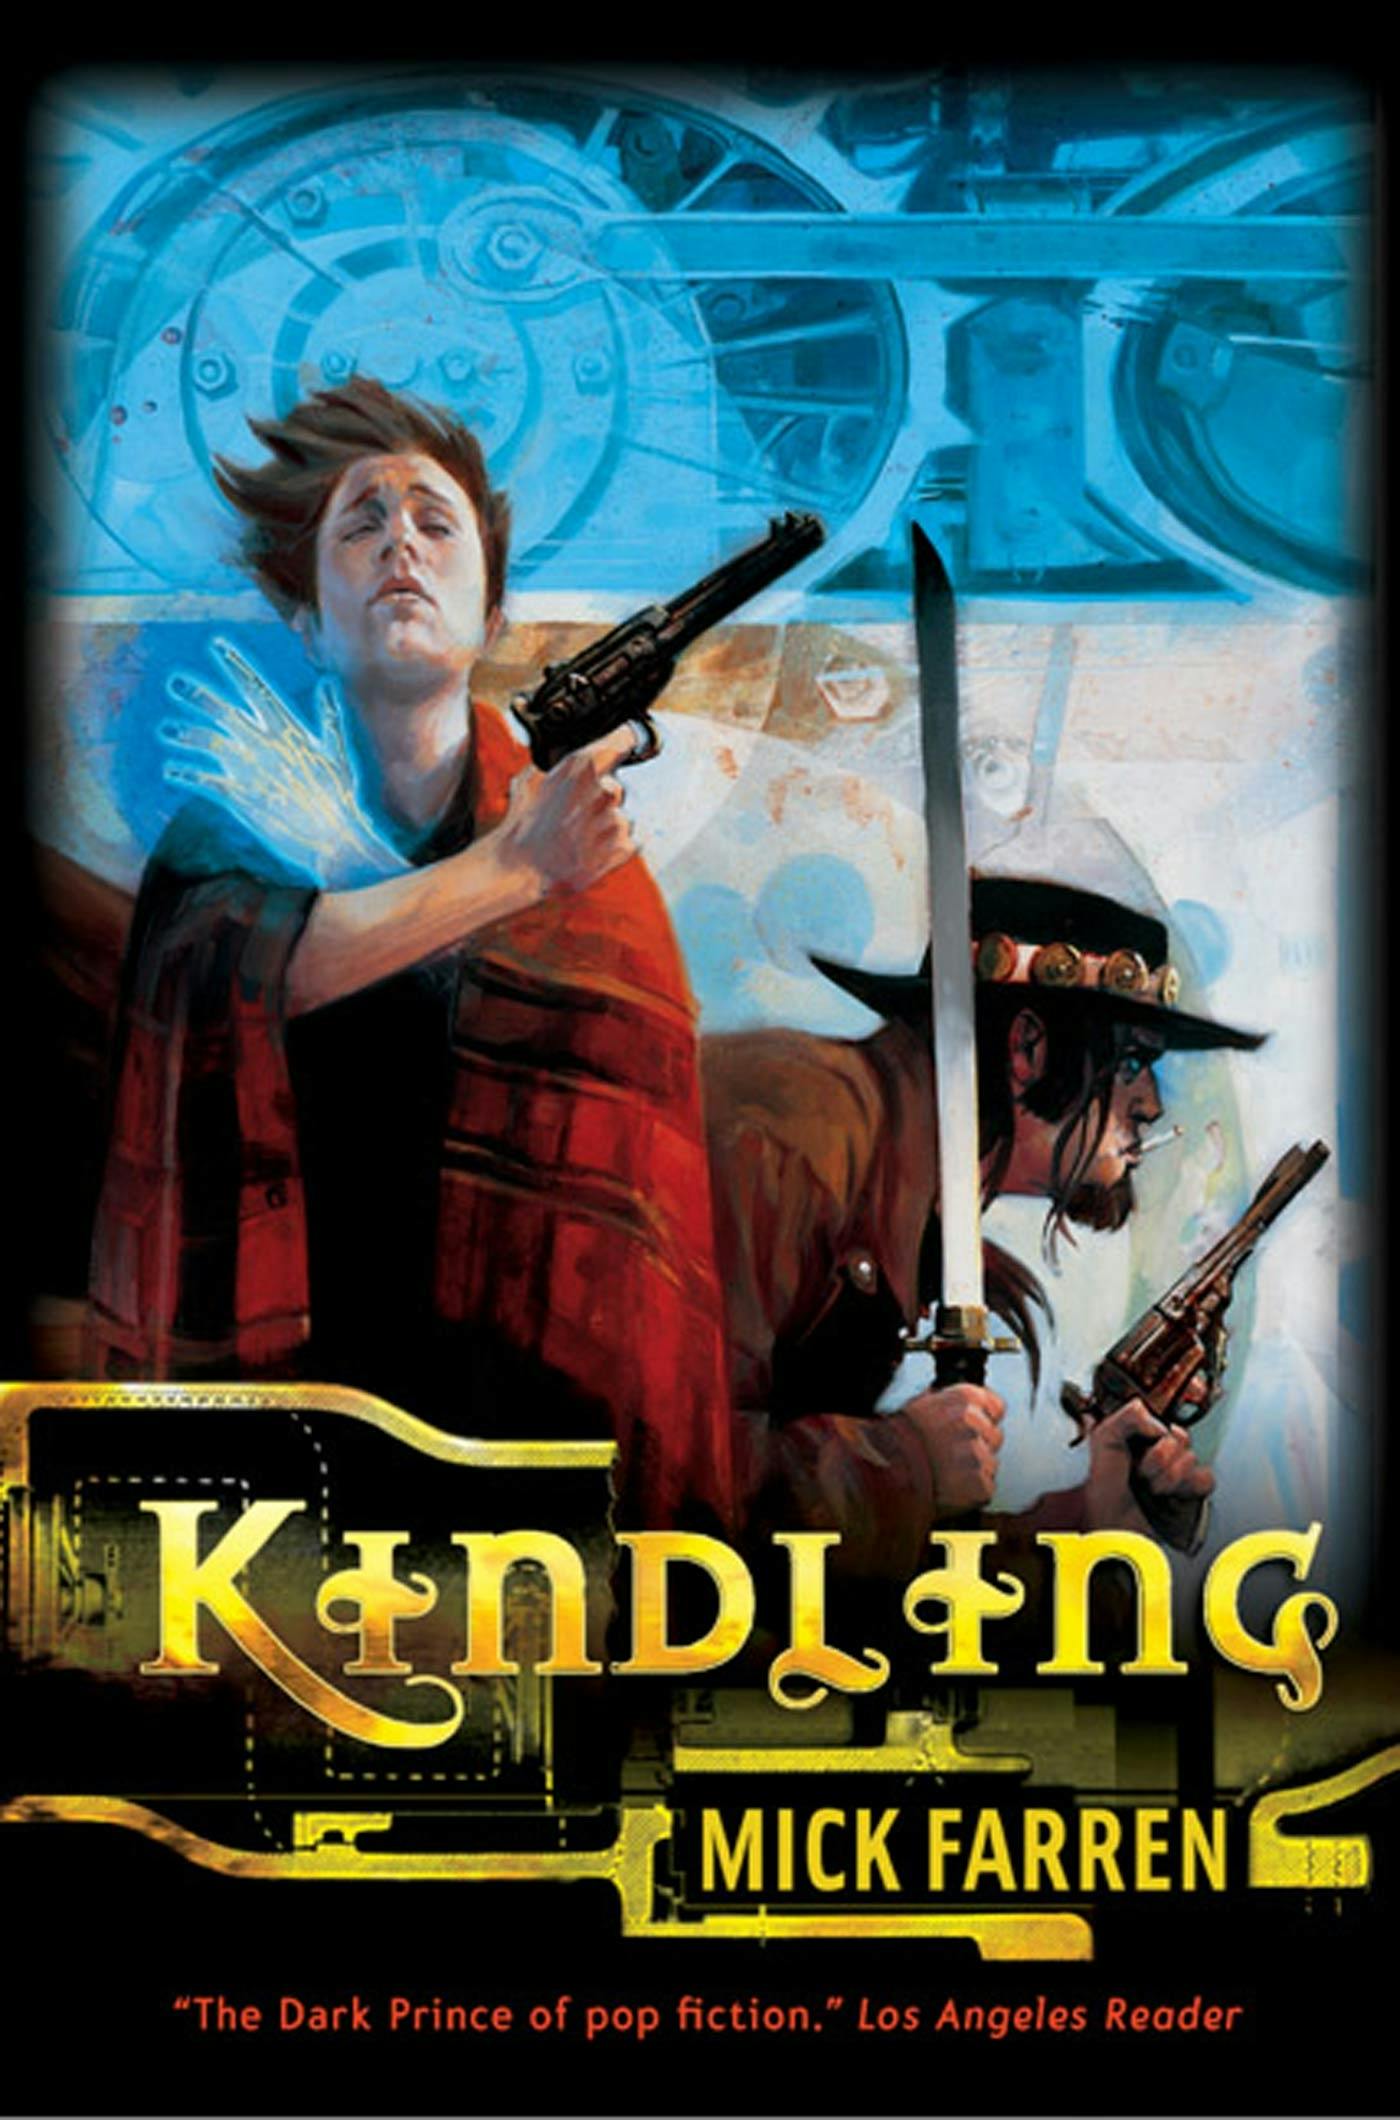 Cover for the book titled as: Kindling